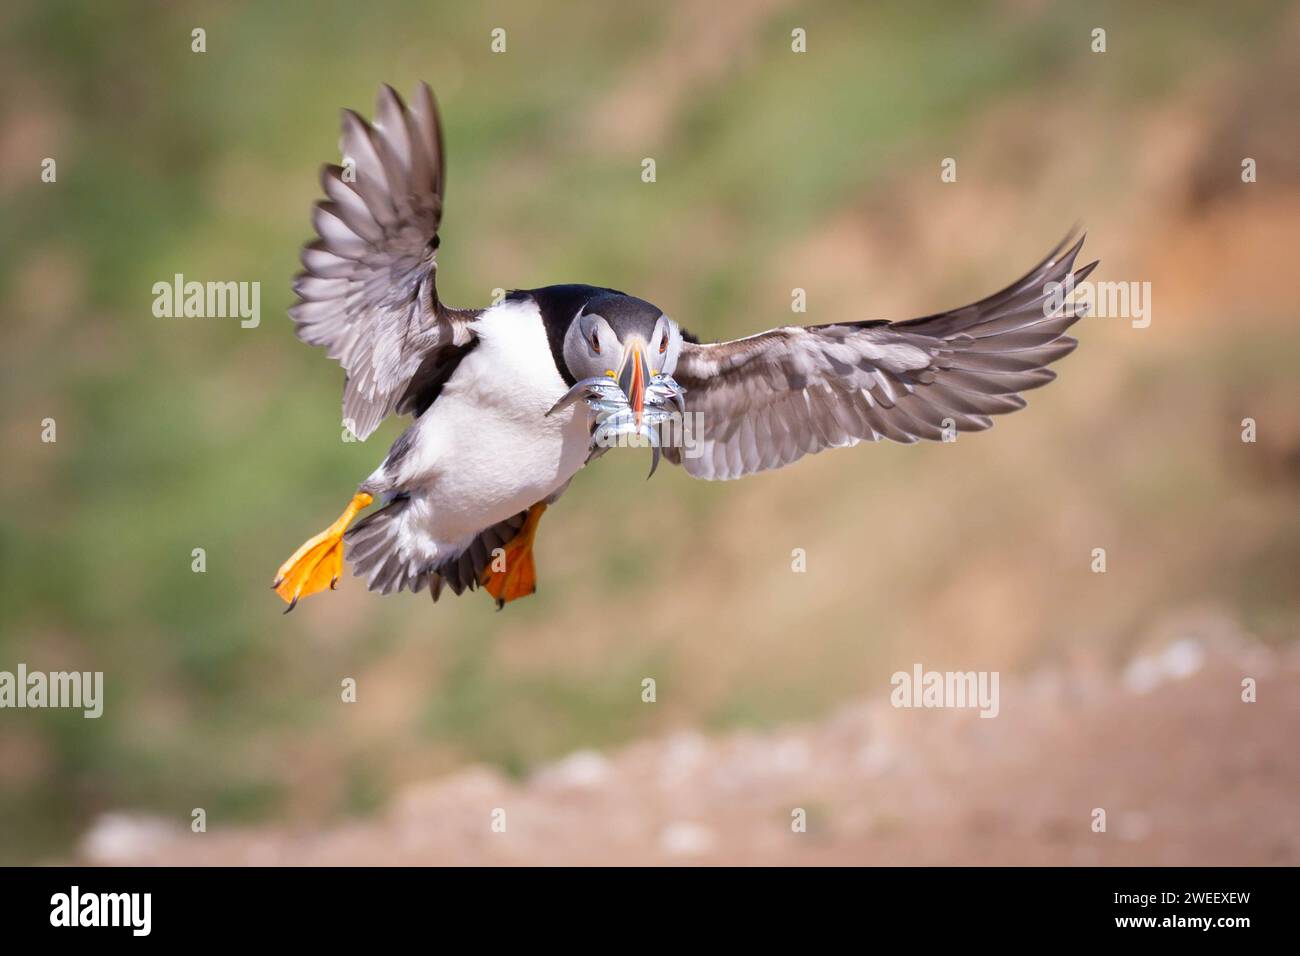 Puffin flying with sand eels in beak. Skomer Island, Pembrokeshire, Wales. Stock Photo